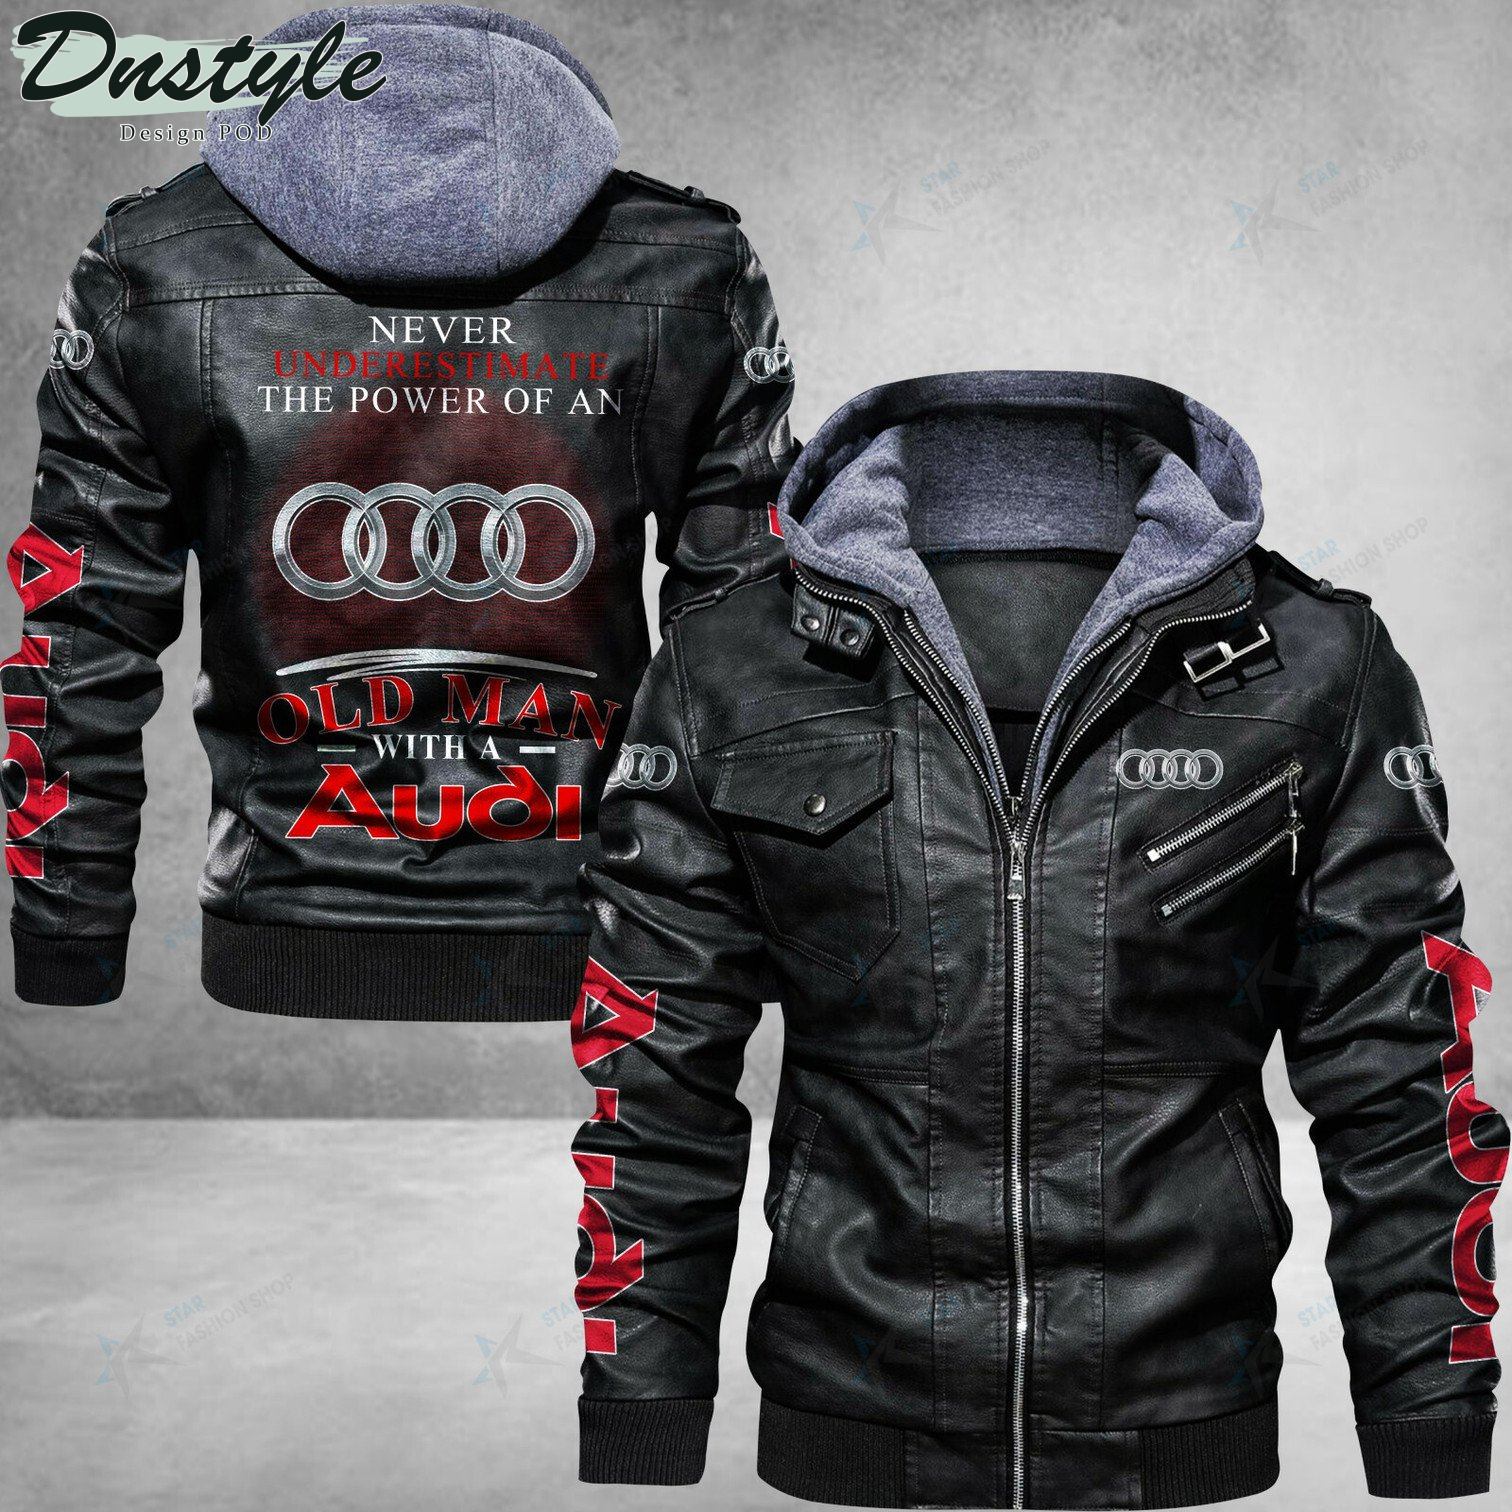 Audi never underestimate the power of an old man leather jacket